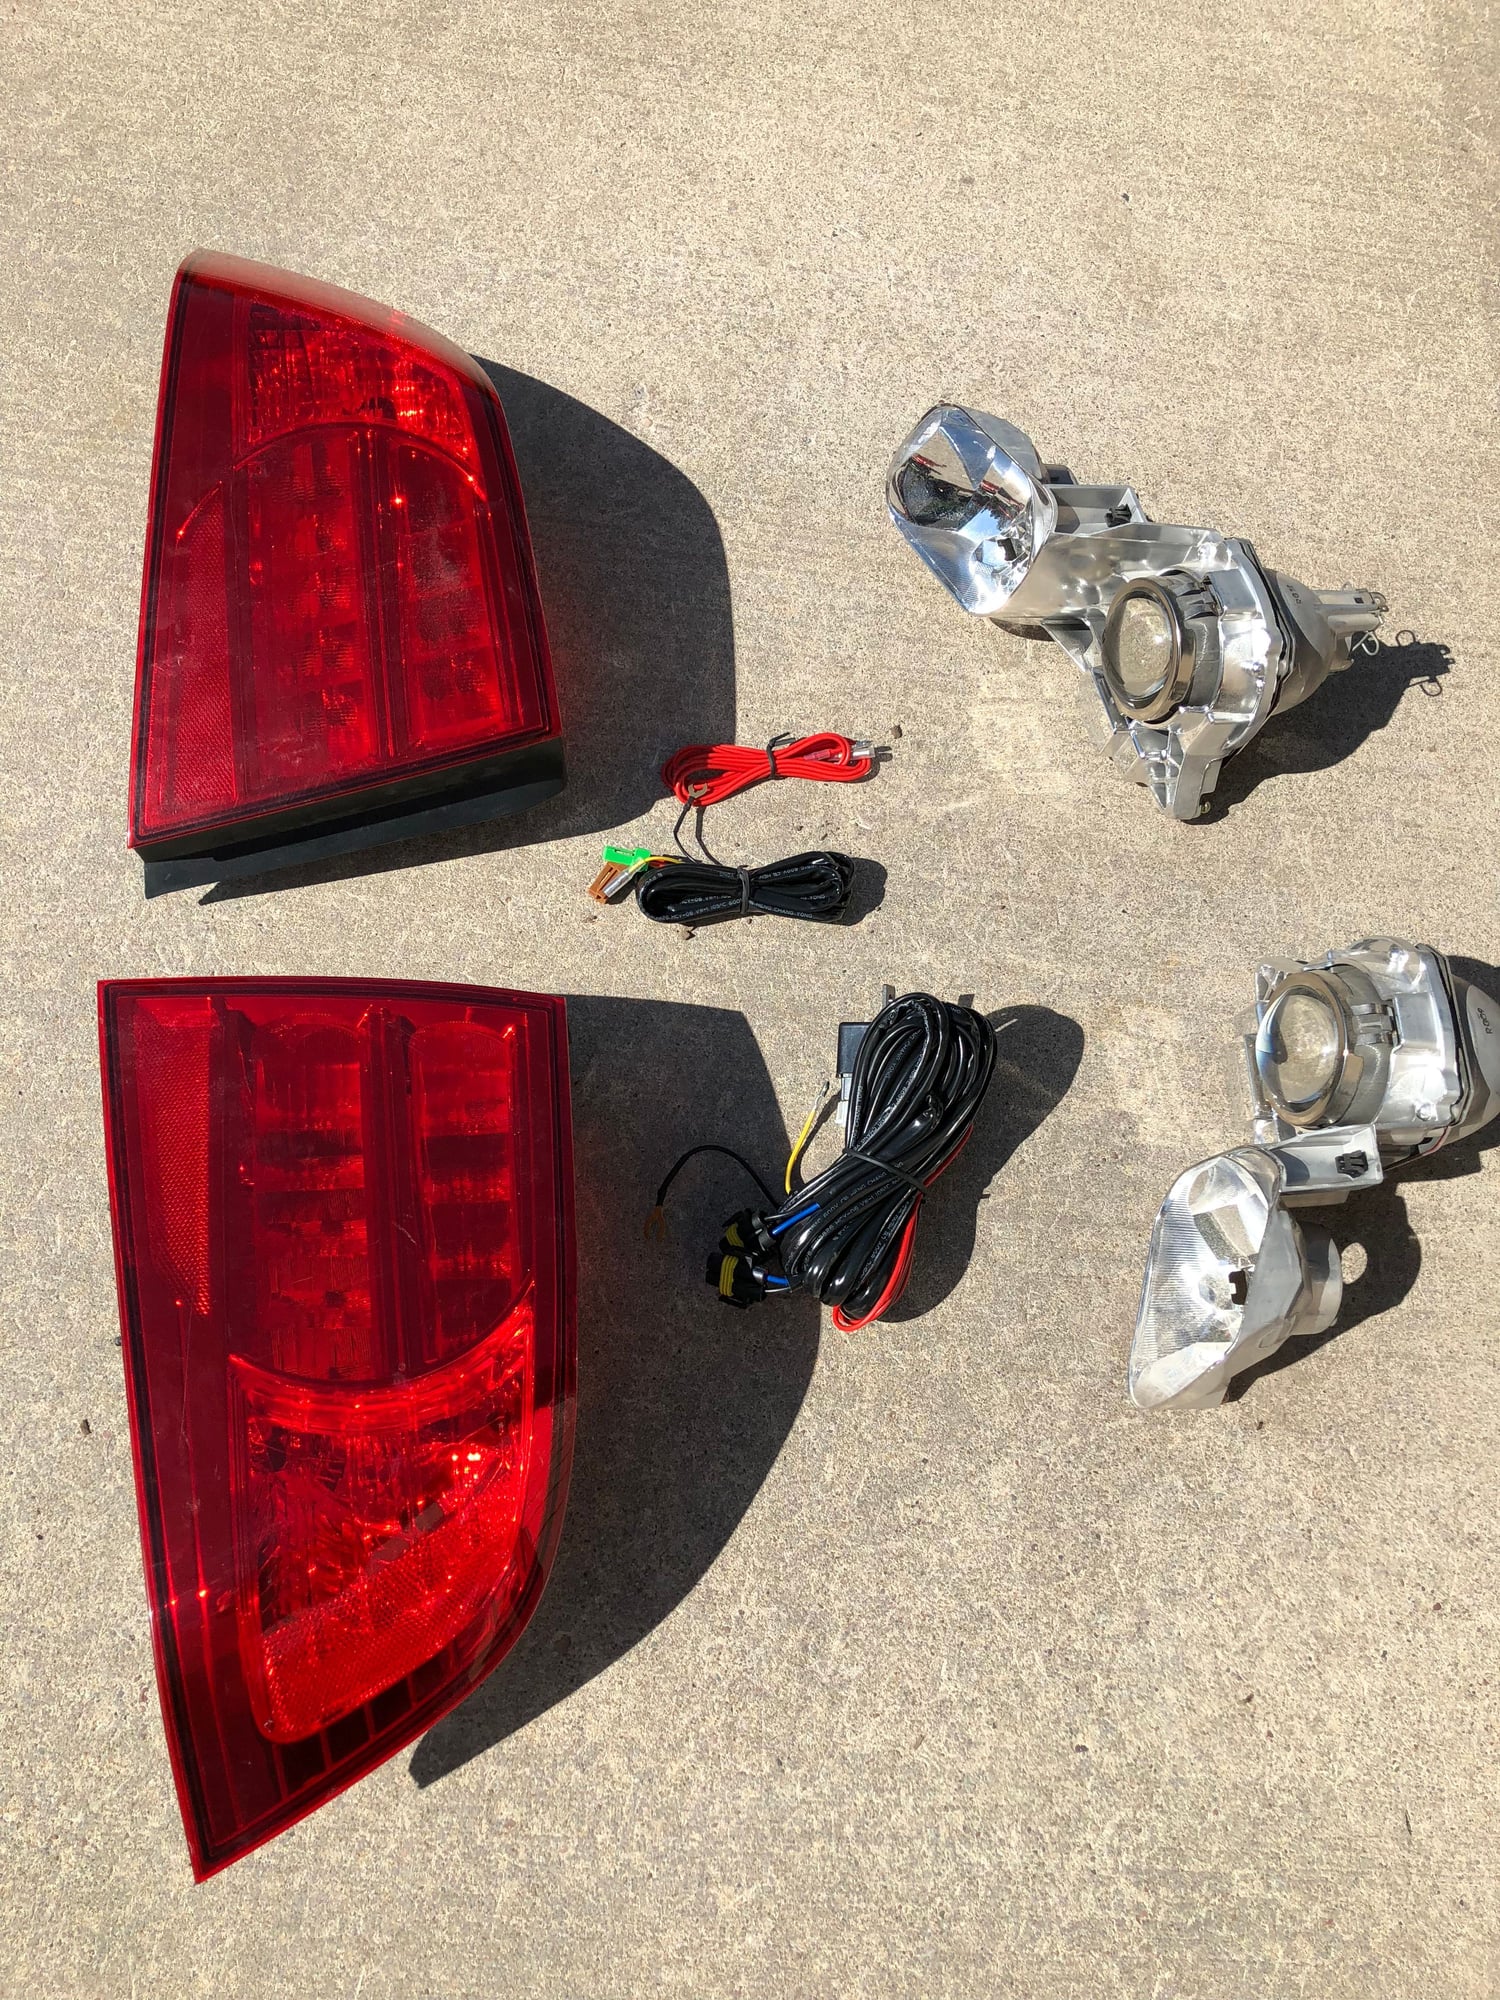 Lights - FS 04 TL OEM projectors with clear lens. OEM taillights without the led boards. - Used - 2004 to 2008 Acura TL - Ronan, MT 59864, United States